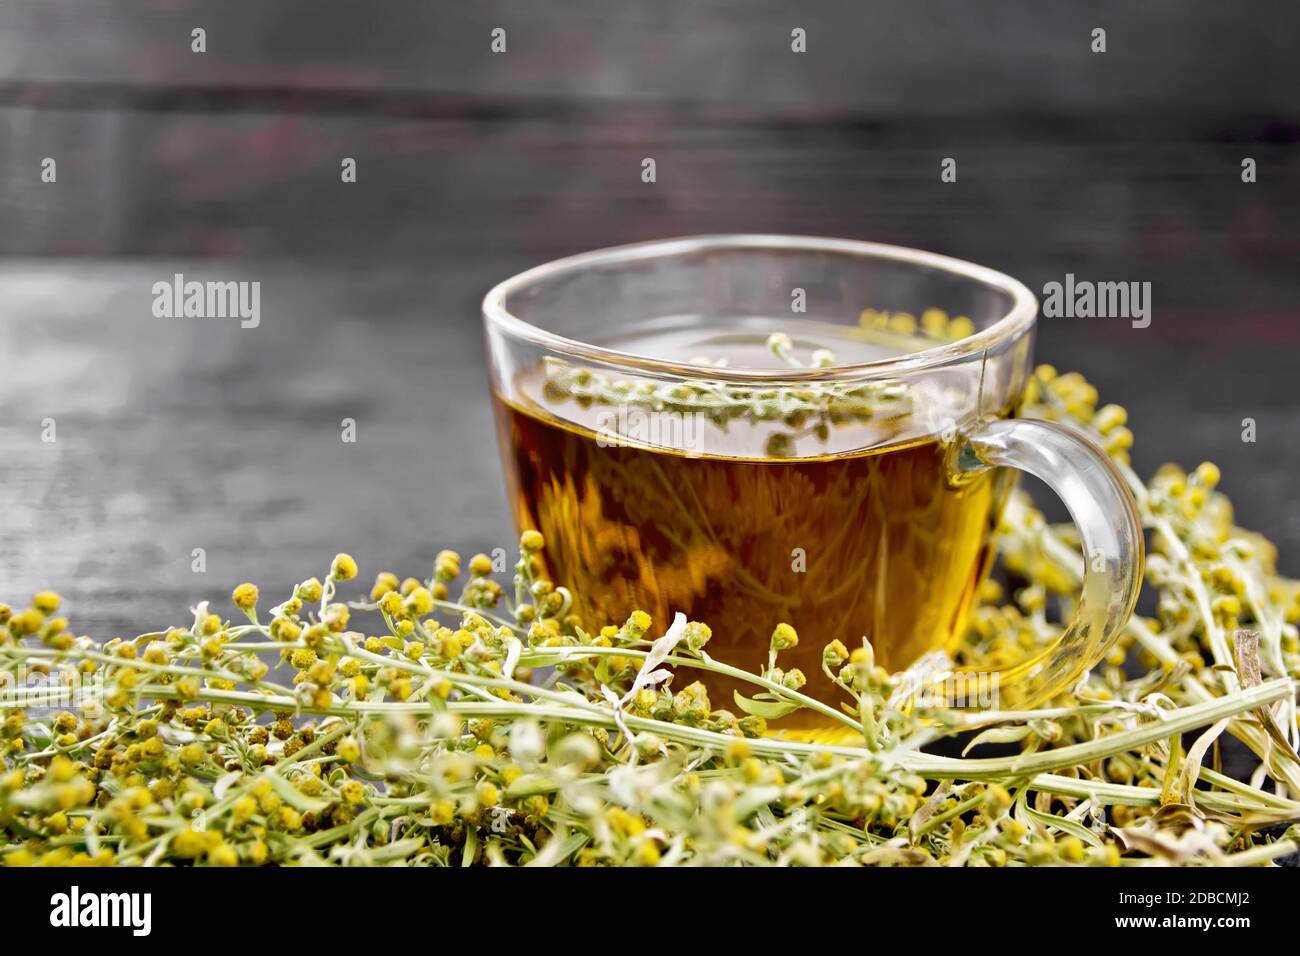 Gray wormwood herbal tea in a glass cup, fresh sagebrush flowers on wooden board background Stock Photo